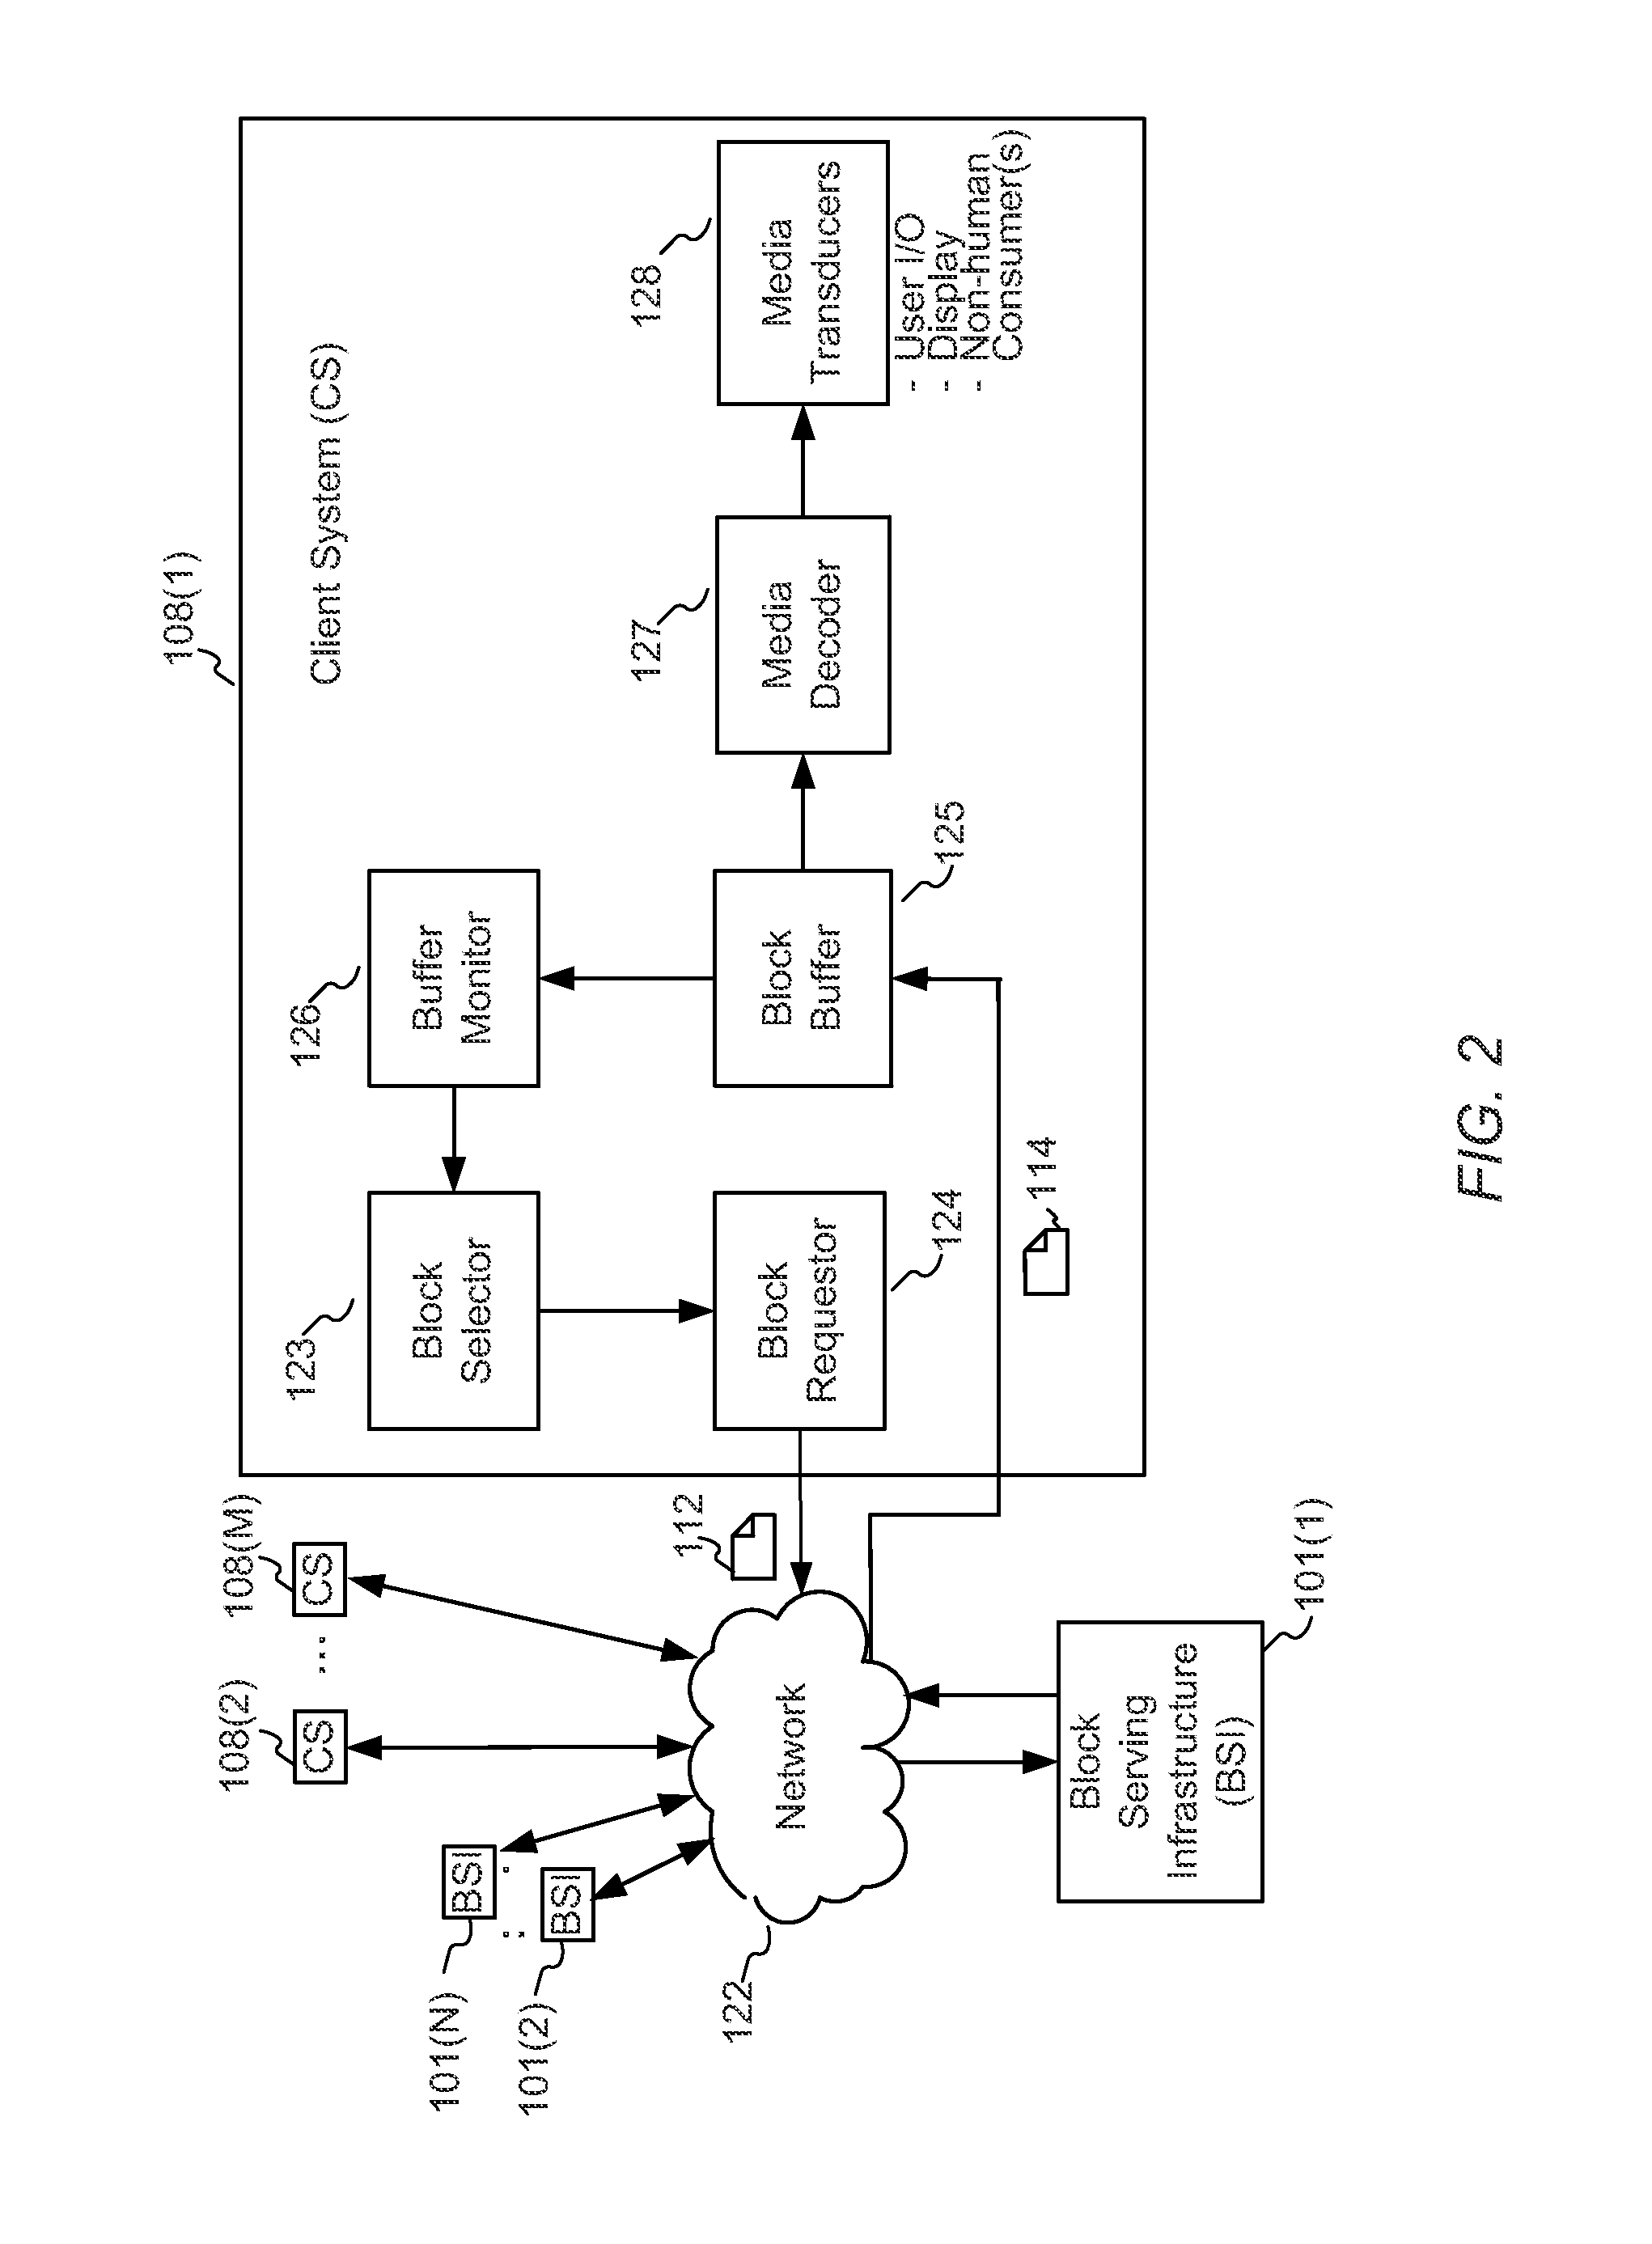 Enhanced block-request streaming system using signaling or block creation